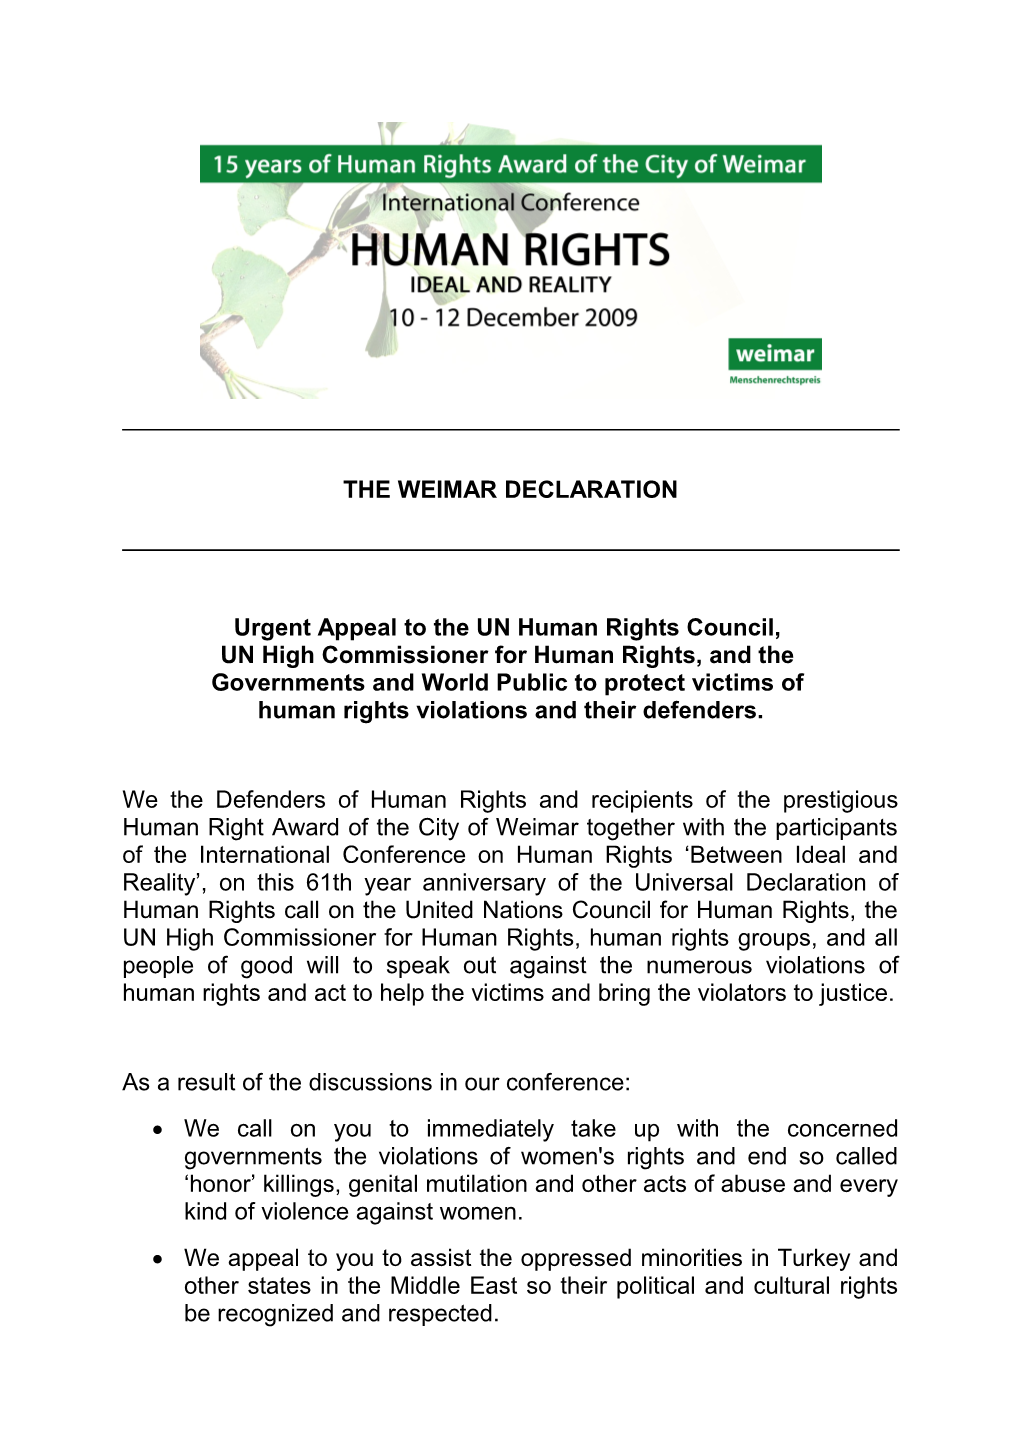 Urgent Appeal to the UN Human Rights Council